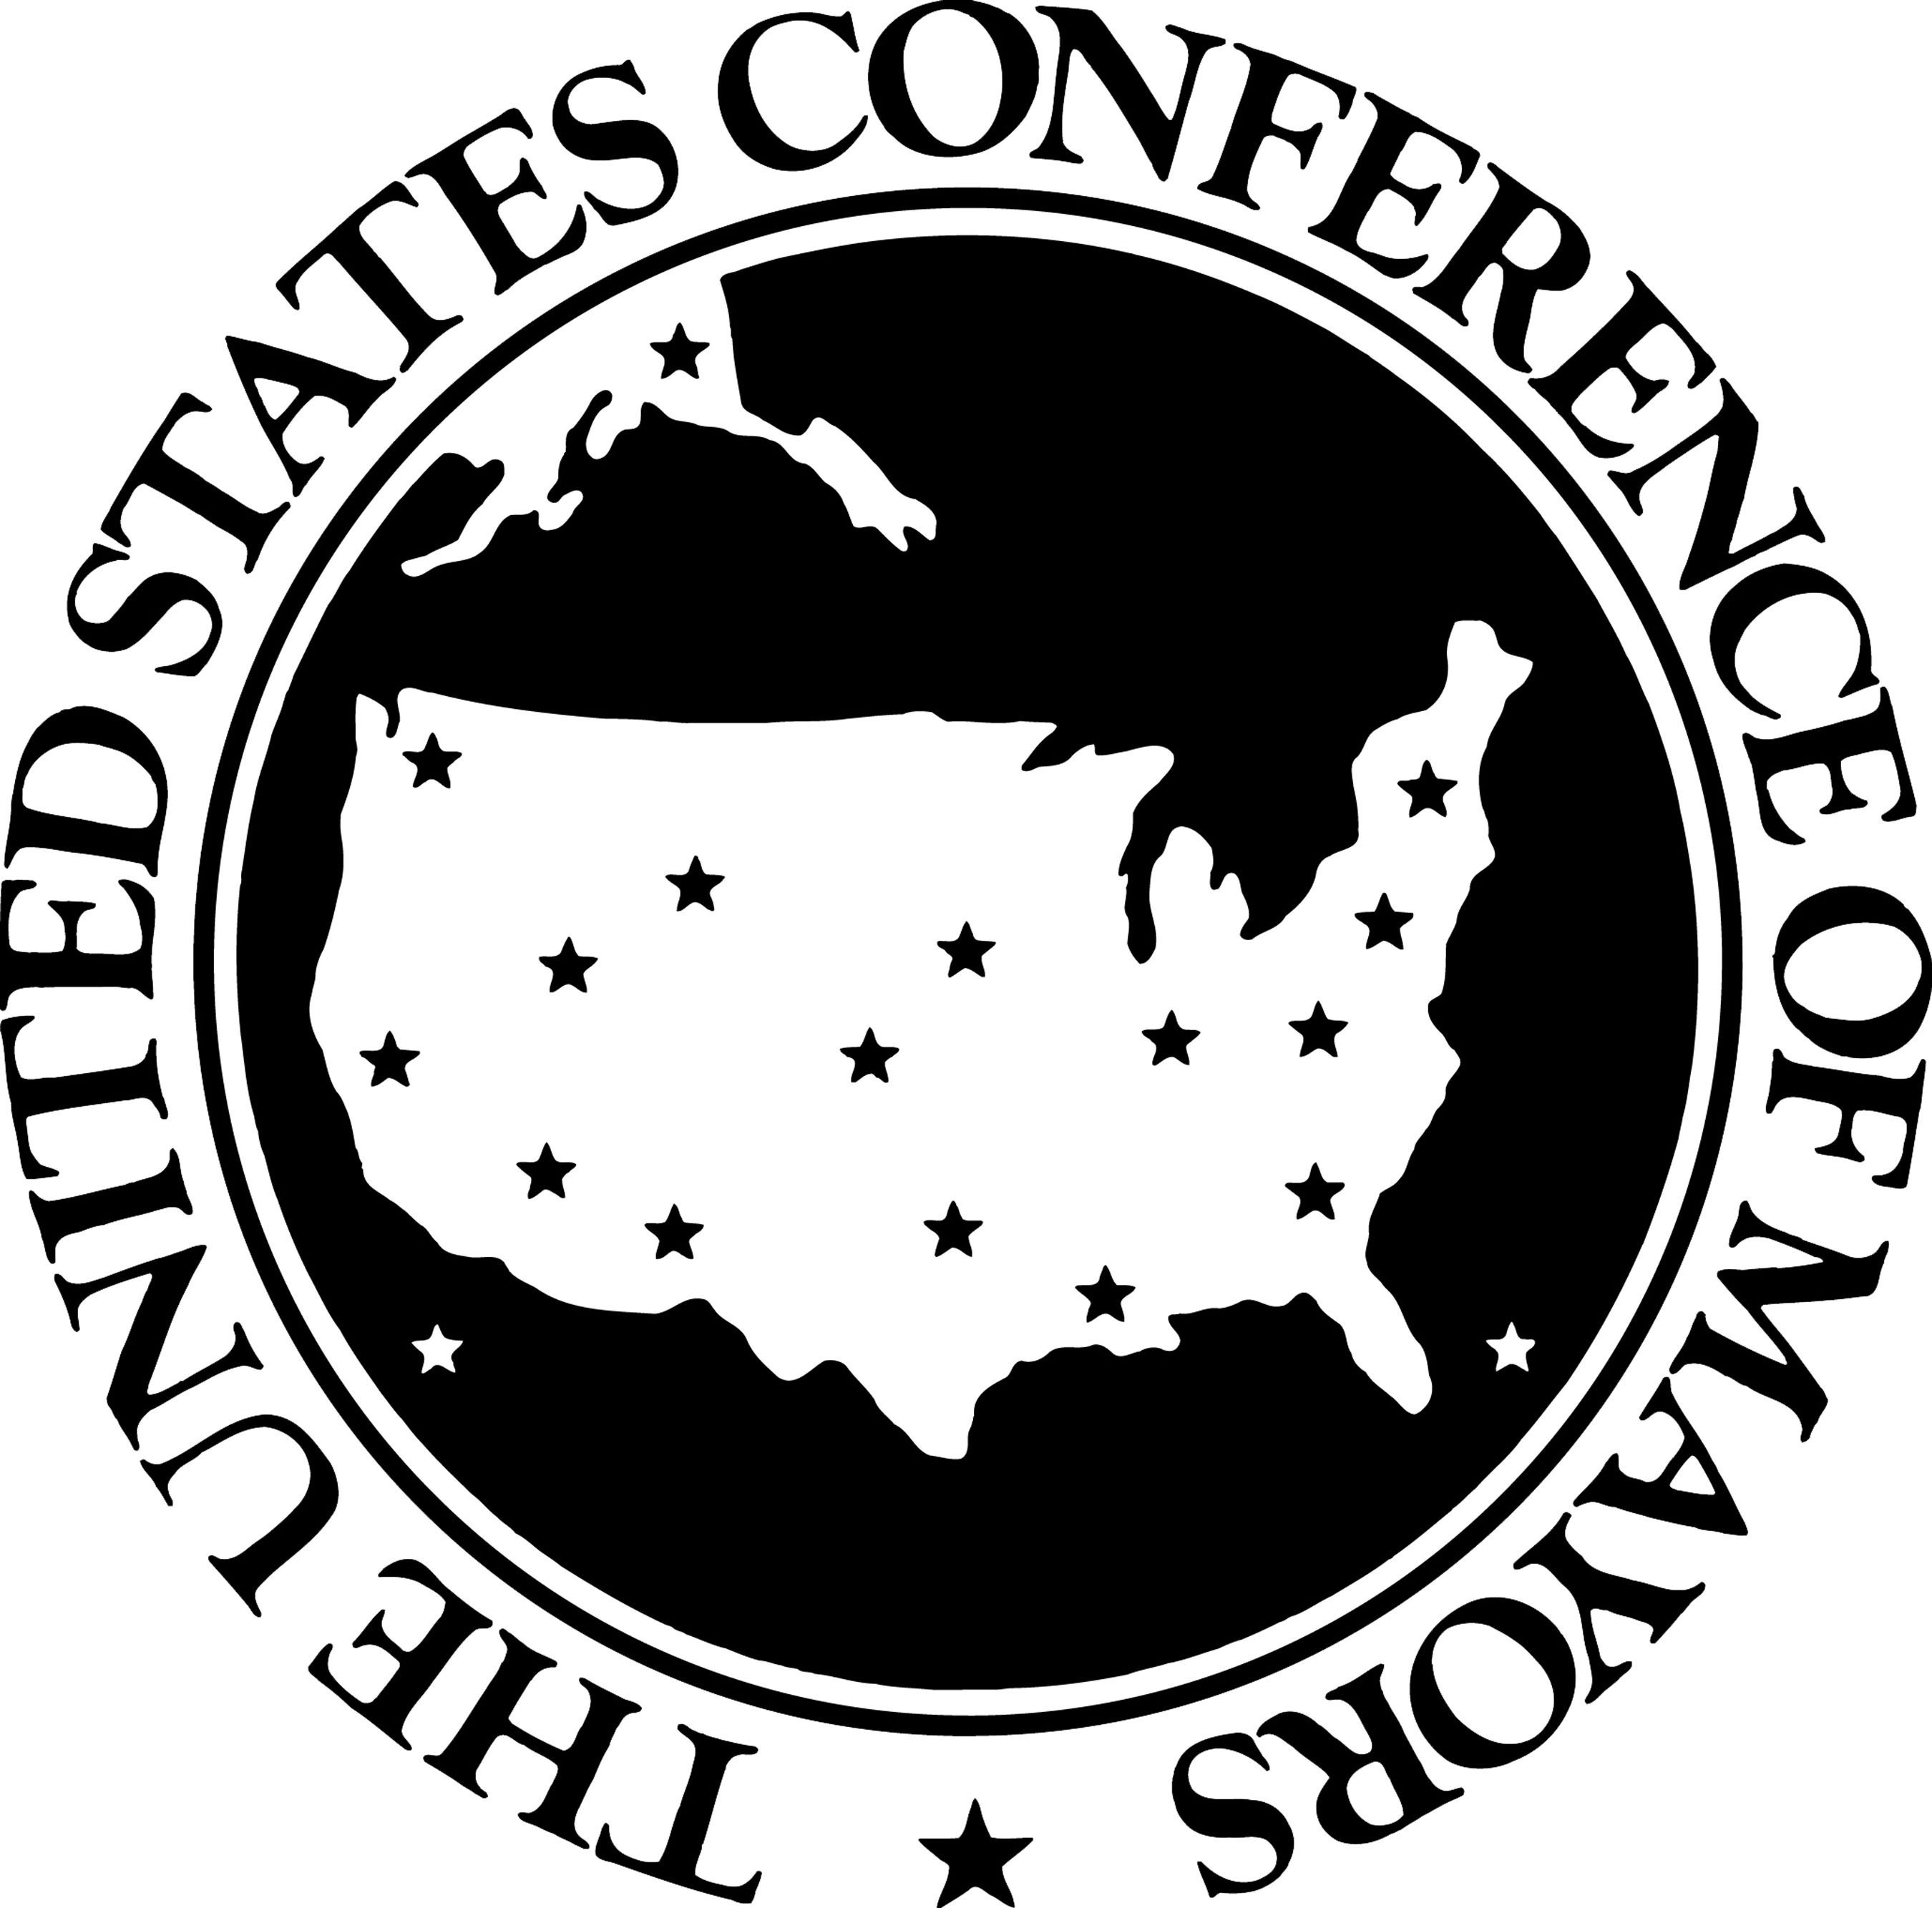 The U.S. Conference of Mayors logo